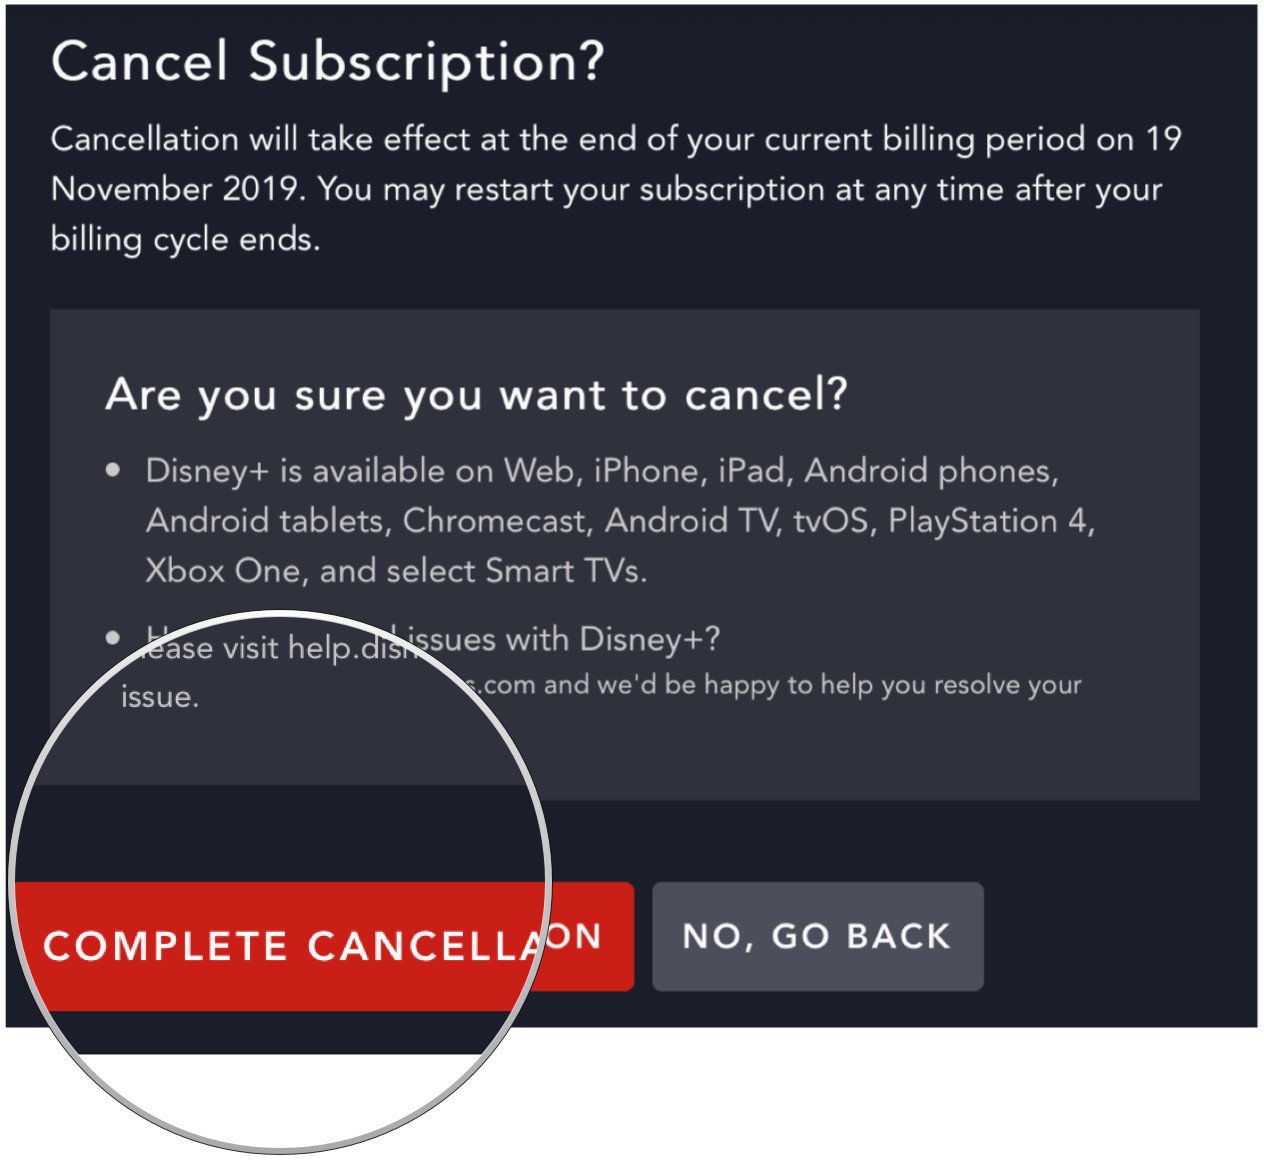 Confirm your cancellation